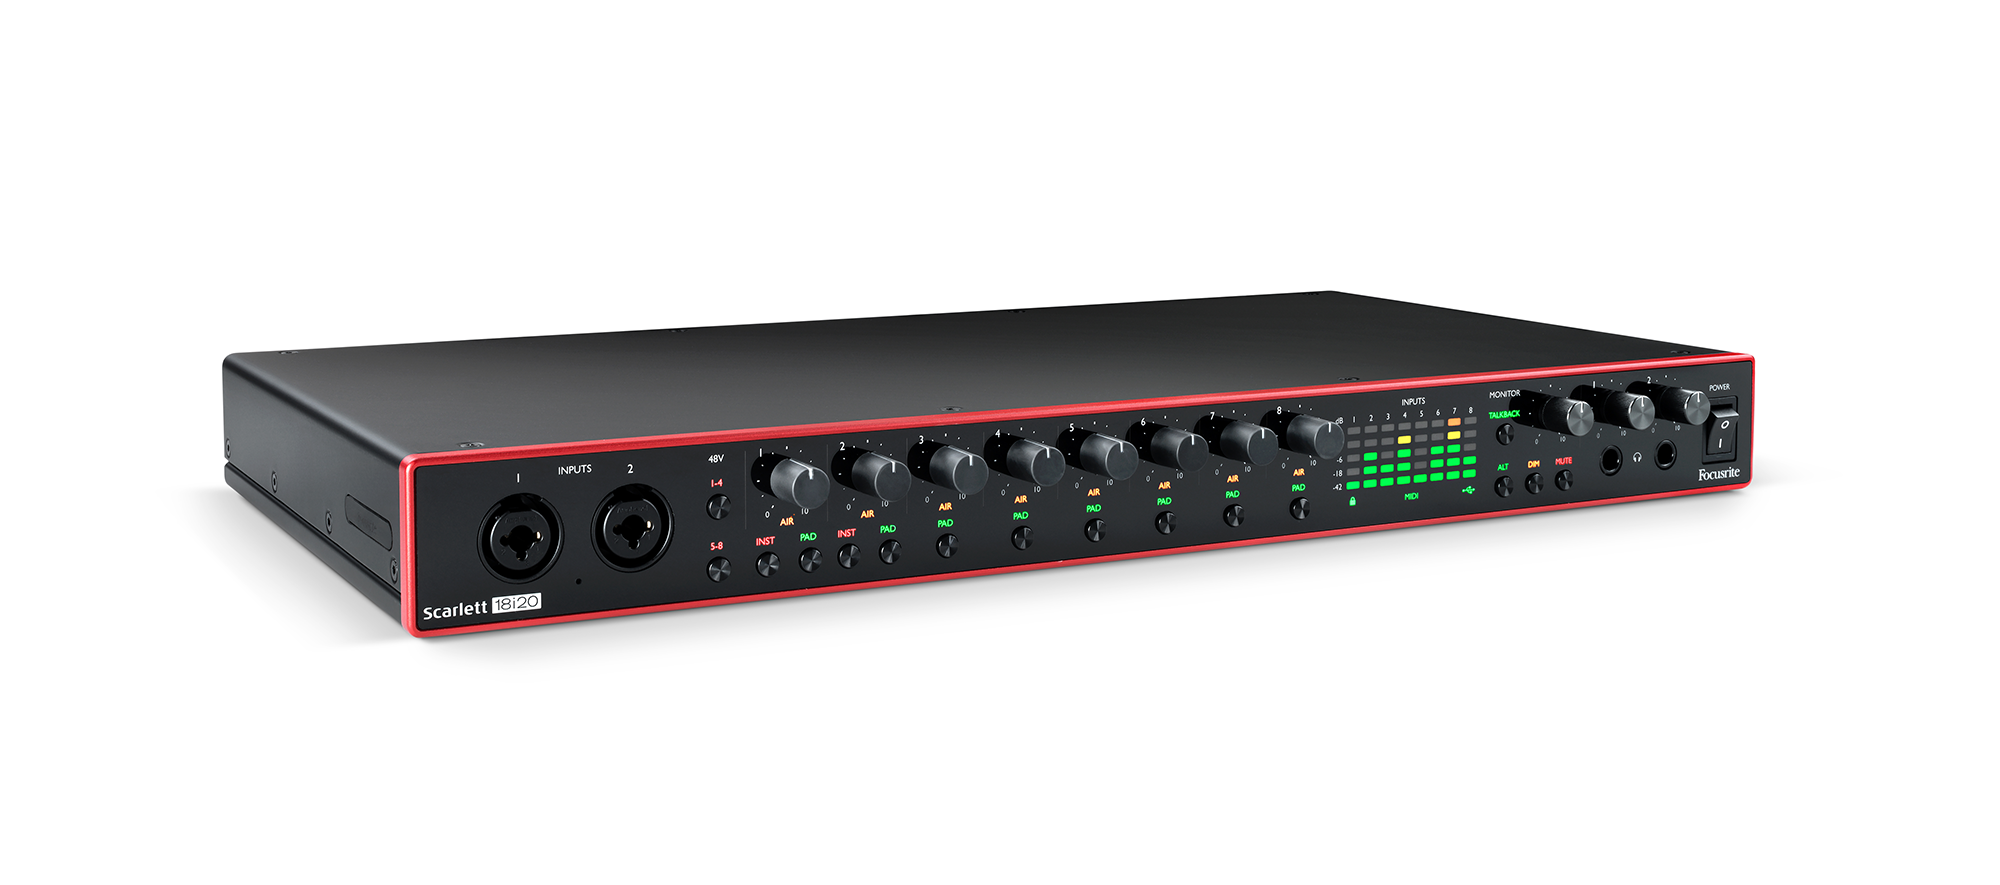 Focusrite scarlett 18i20 driver windows 10 download recommended app store for this computer